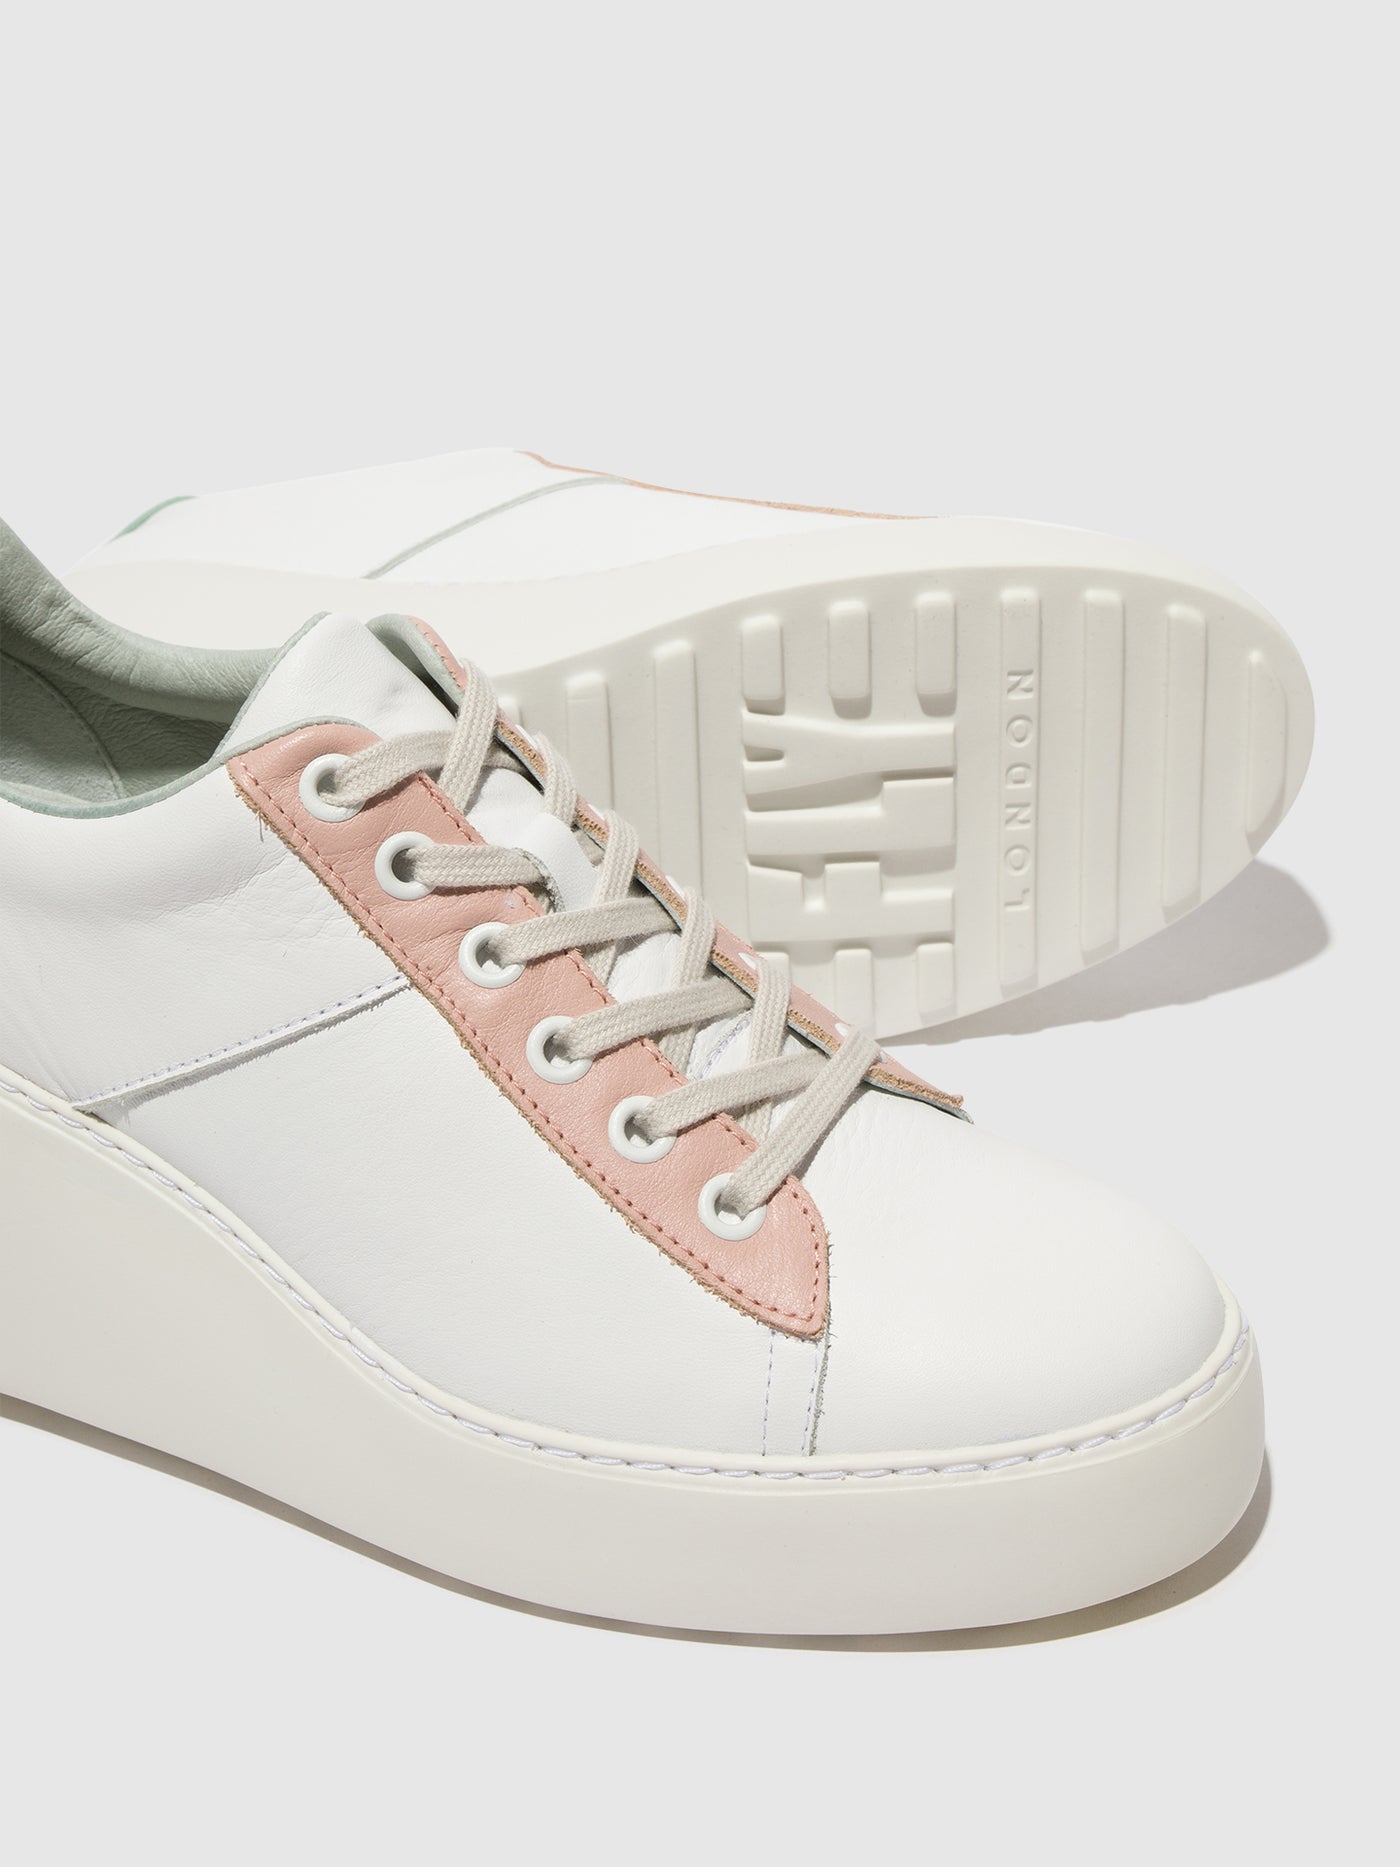 Lace-up Trainers DELF580FLY WHITE/NUDE/MINT